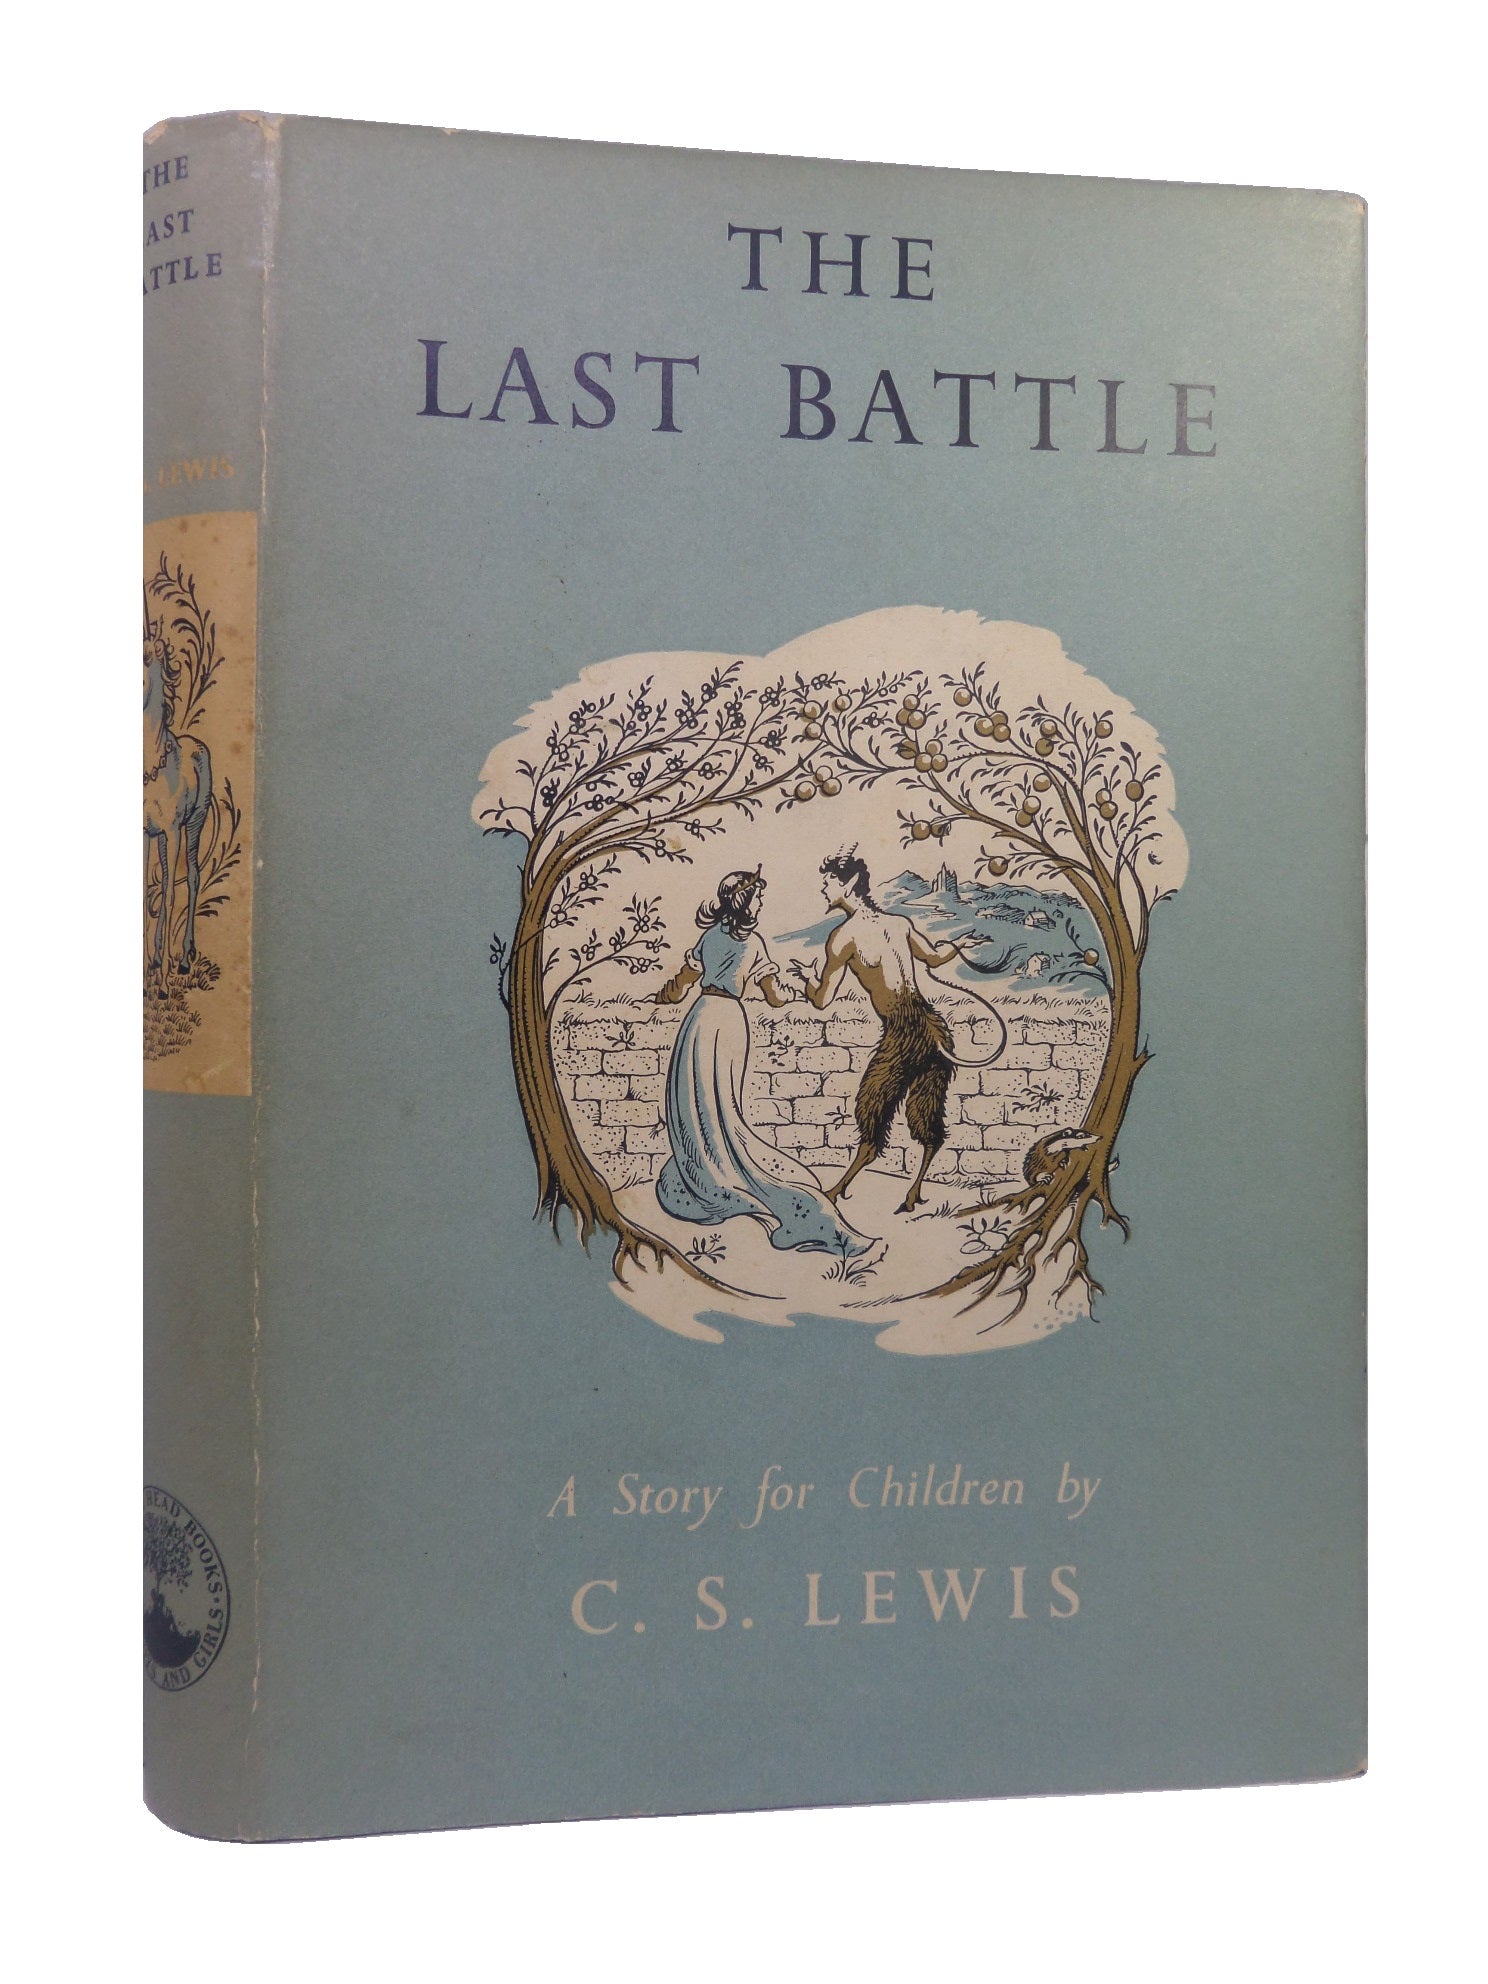 THE LAST BATTLE BY C. S. LEWIS 1956 FIRST EDITION